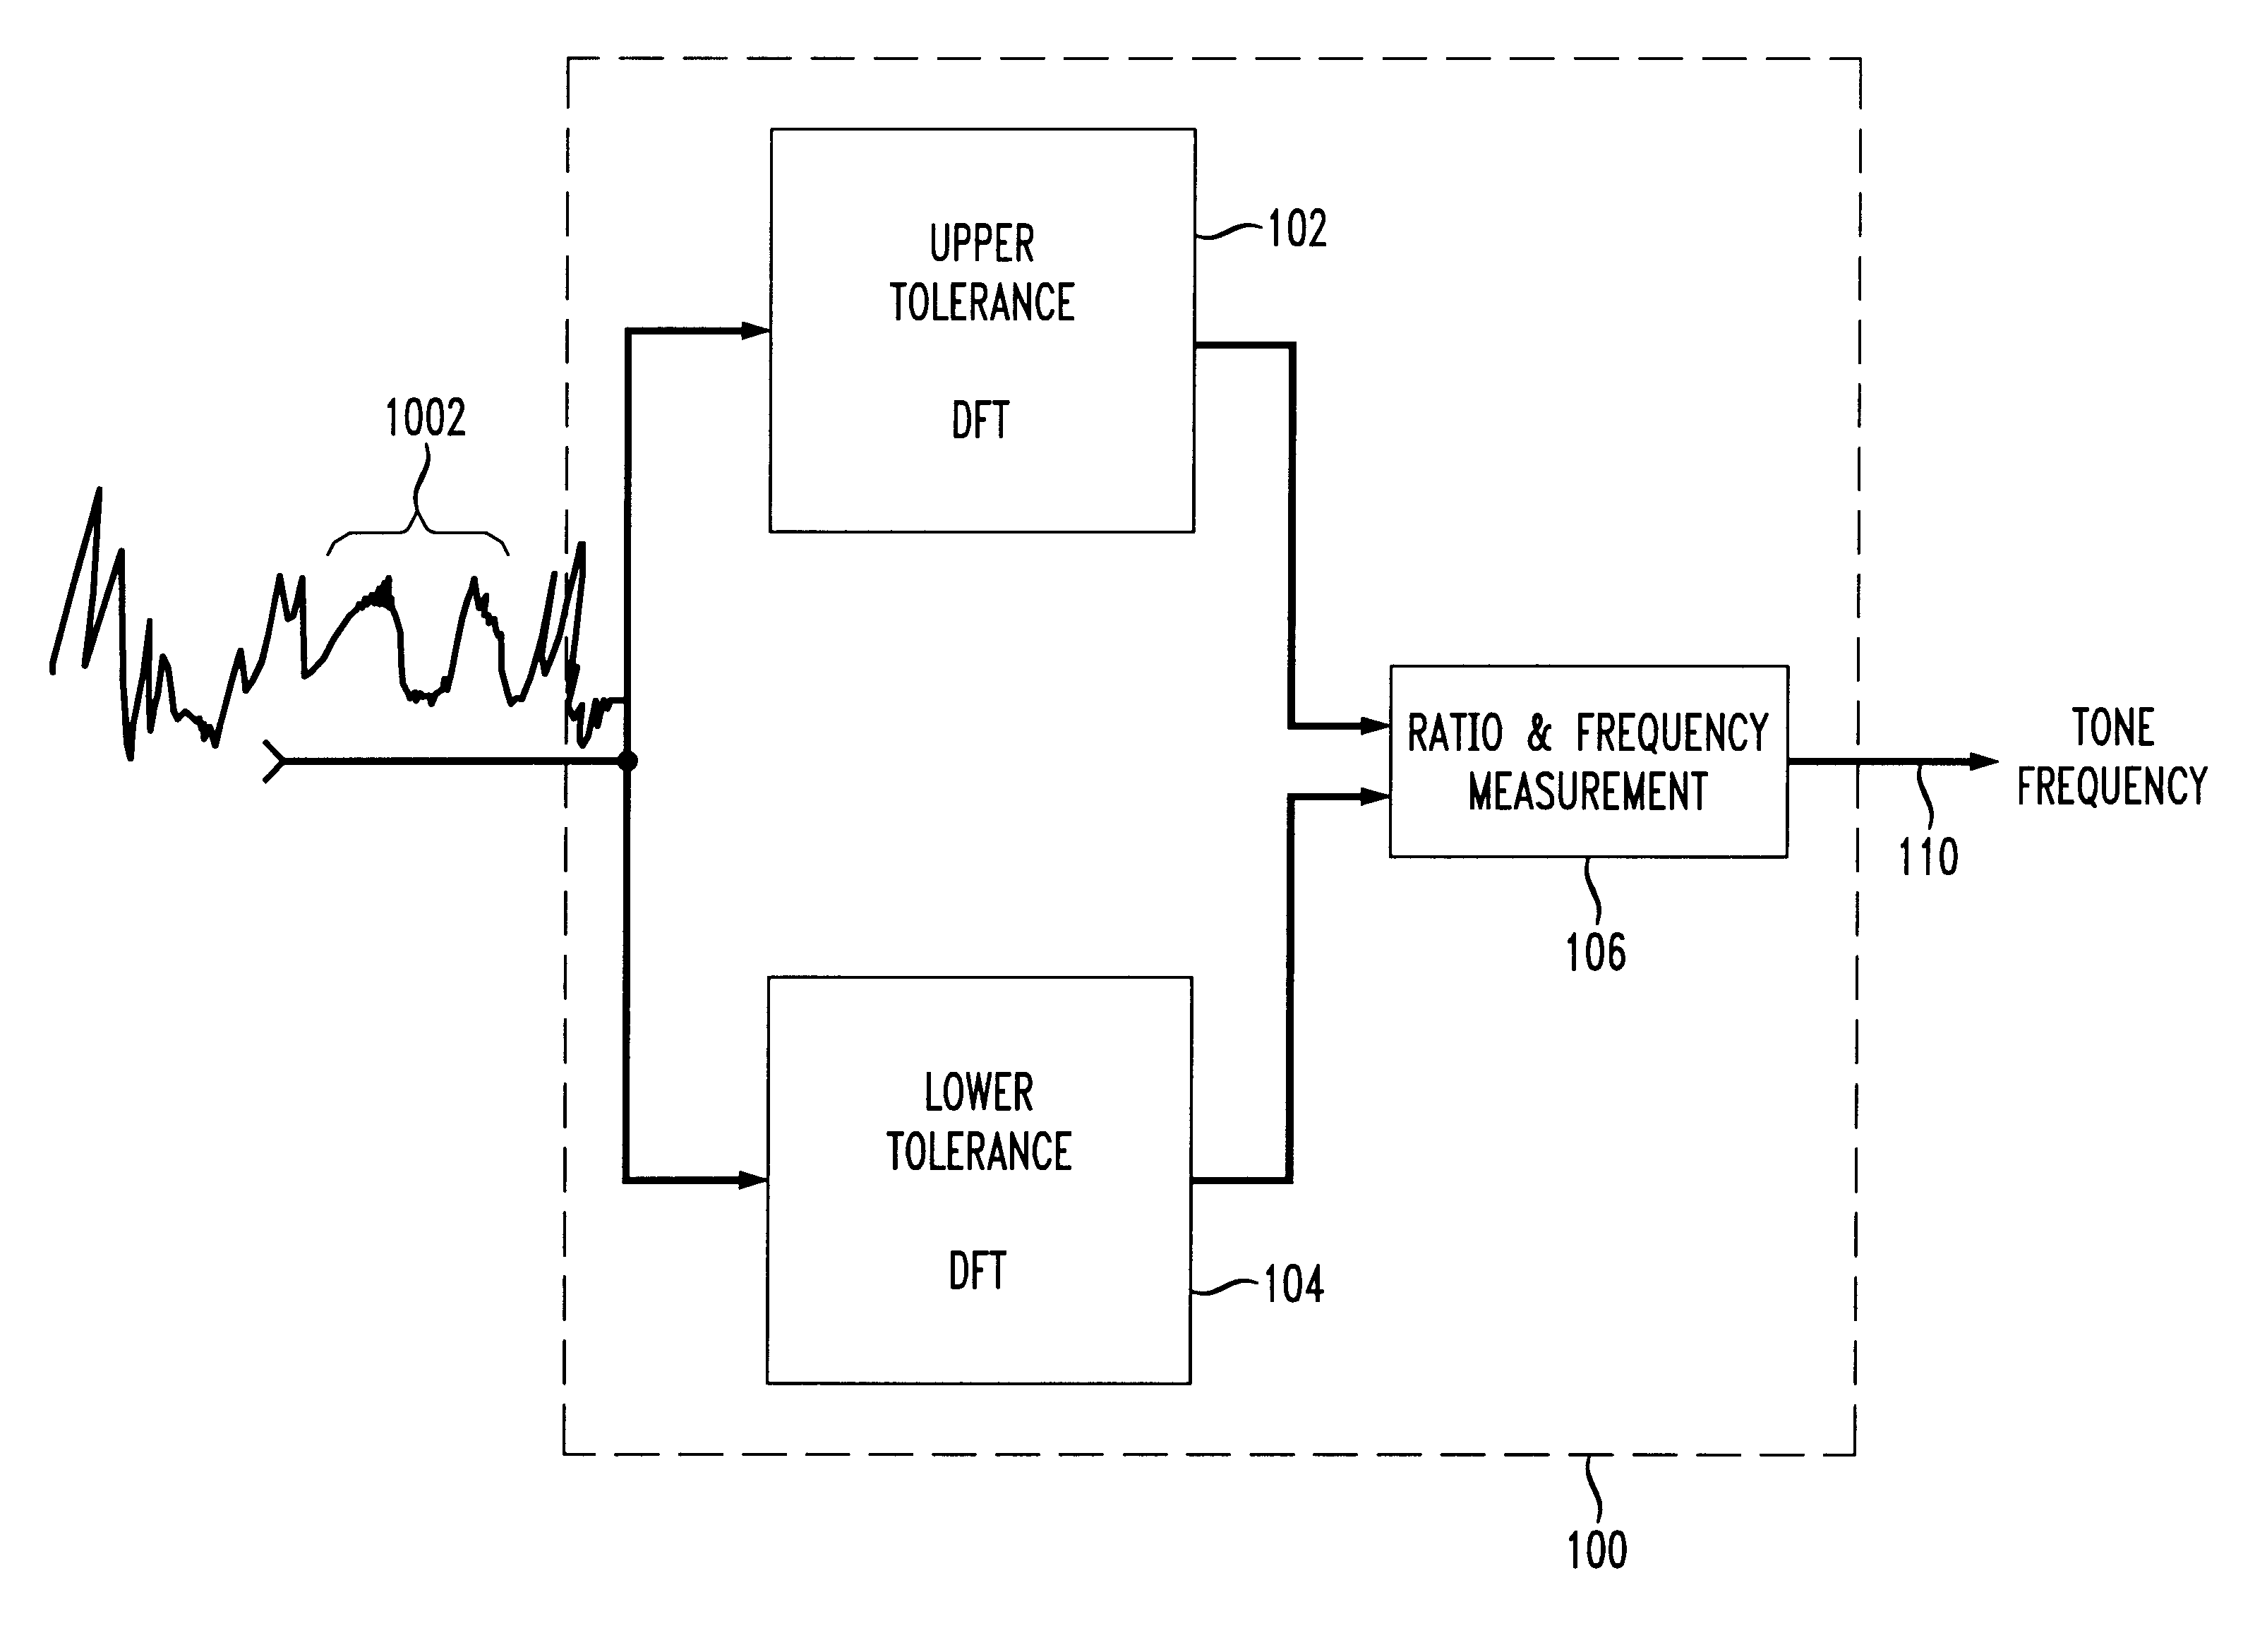 Robust signaling tone frequency measurement